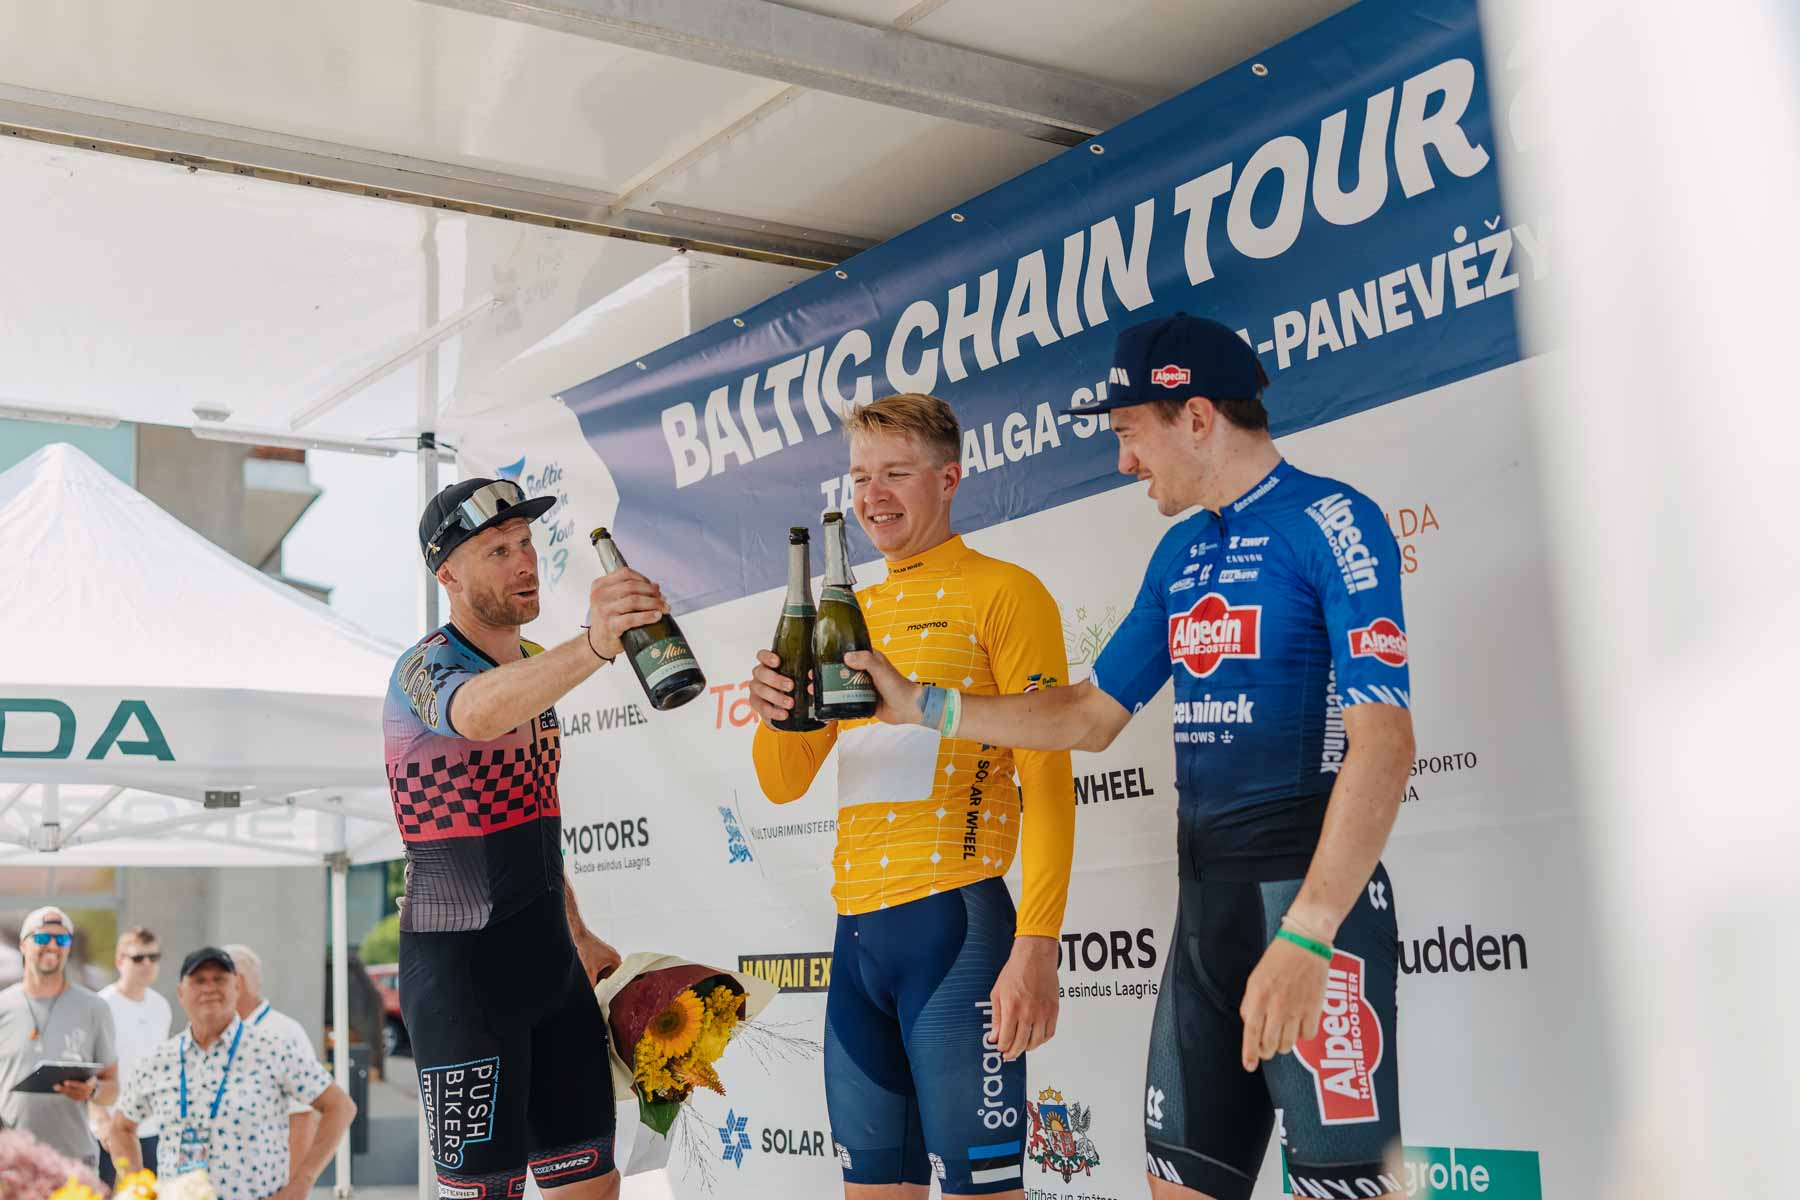 3rd place in the GC of the Baltic Chain Tour